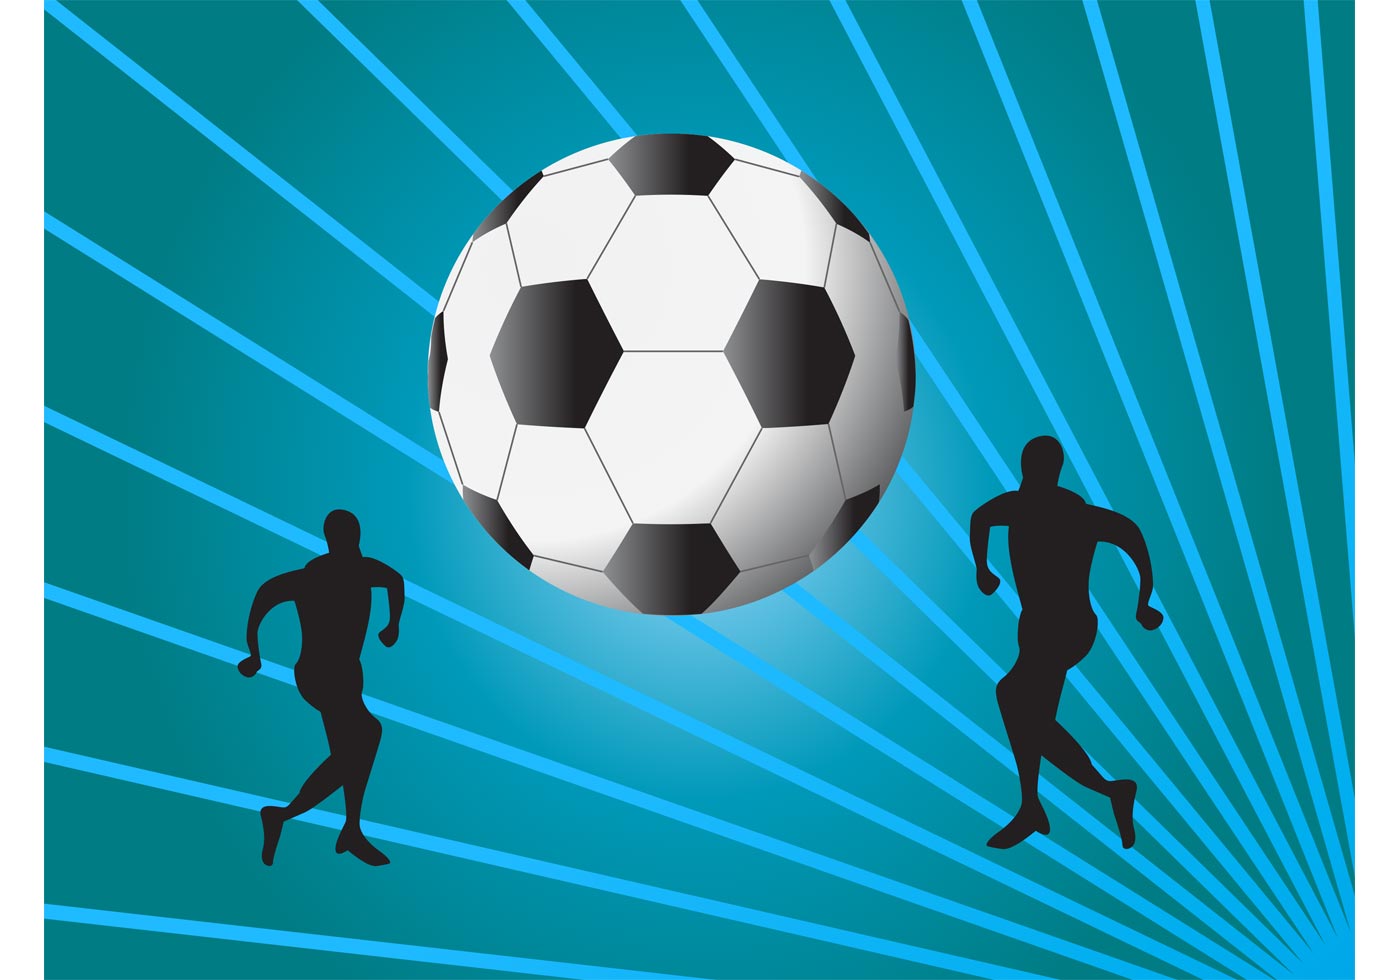 Download Free Football Vector - Download Free Vector Art, Stock Graphics & Images